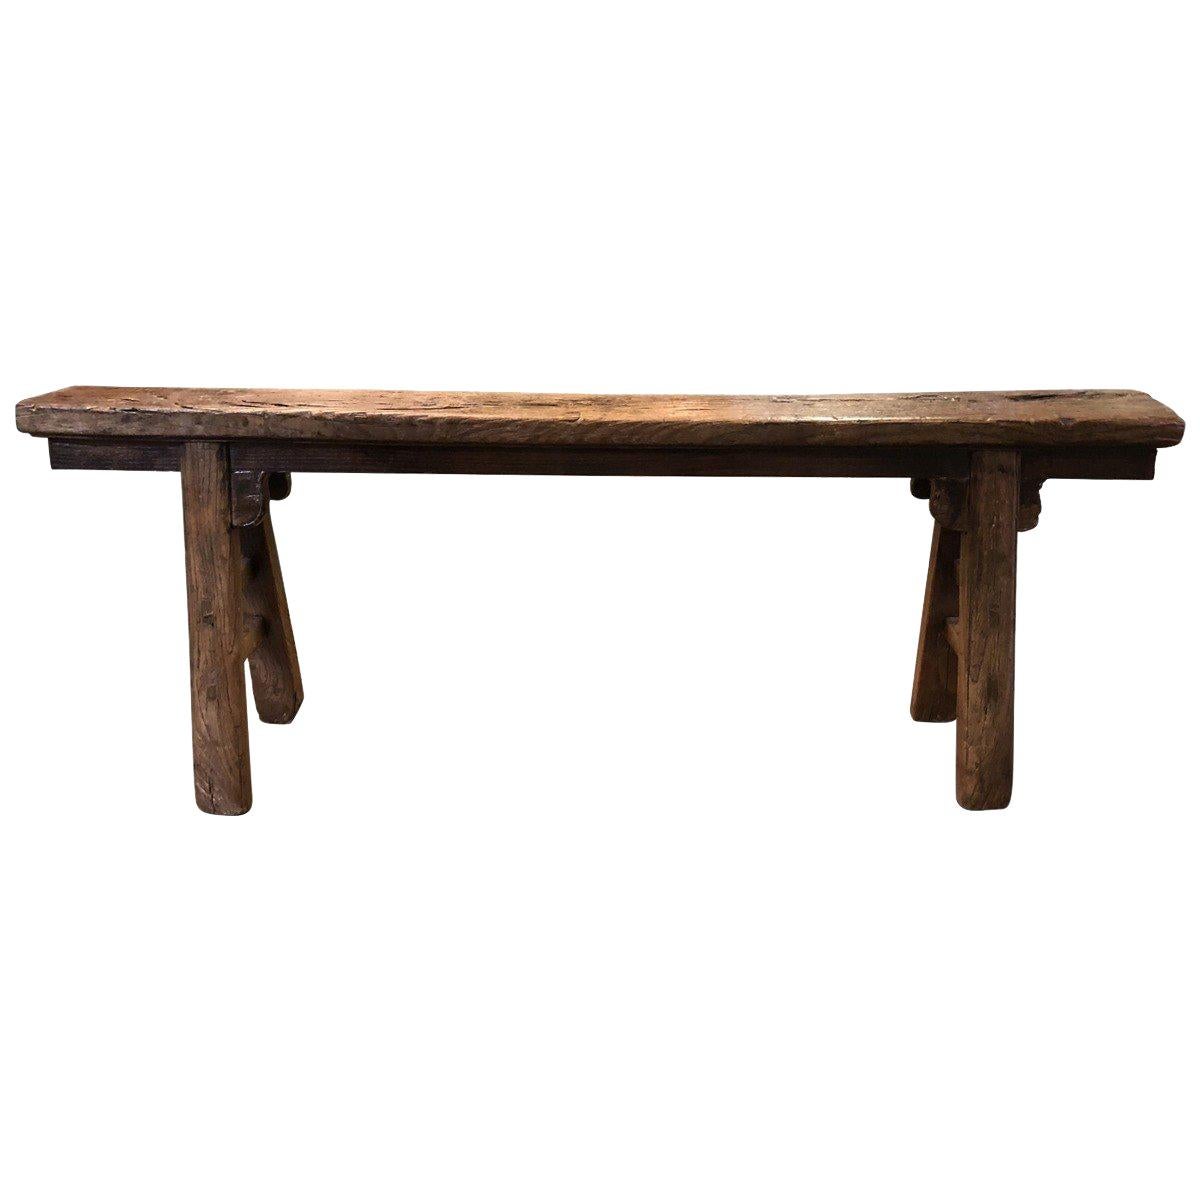 Rustic Narrow Bench, Chinese